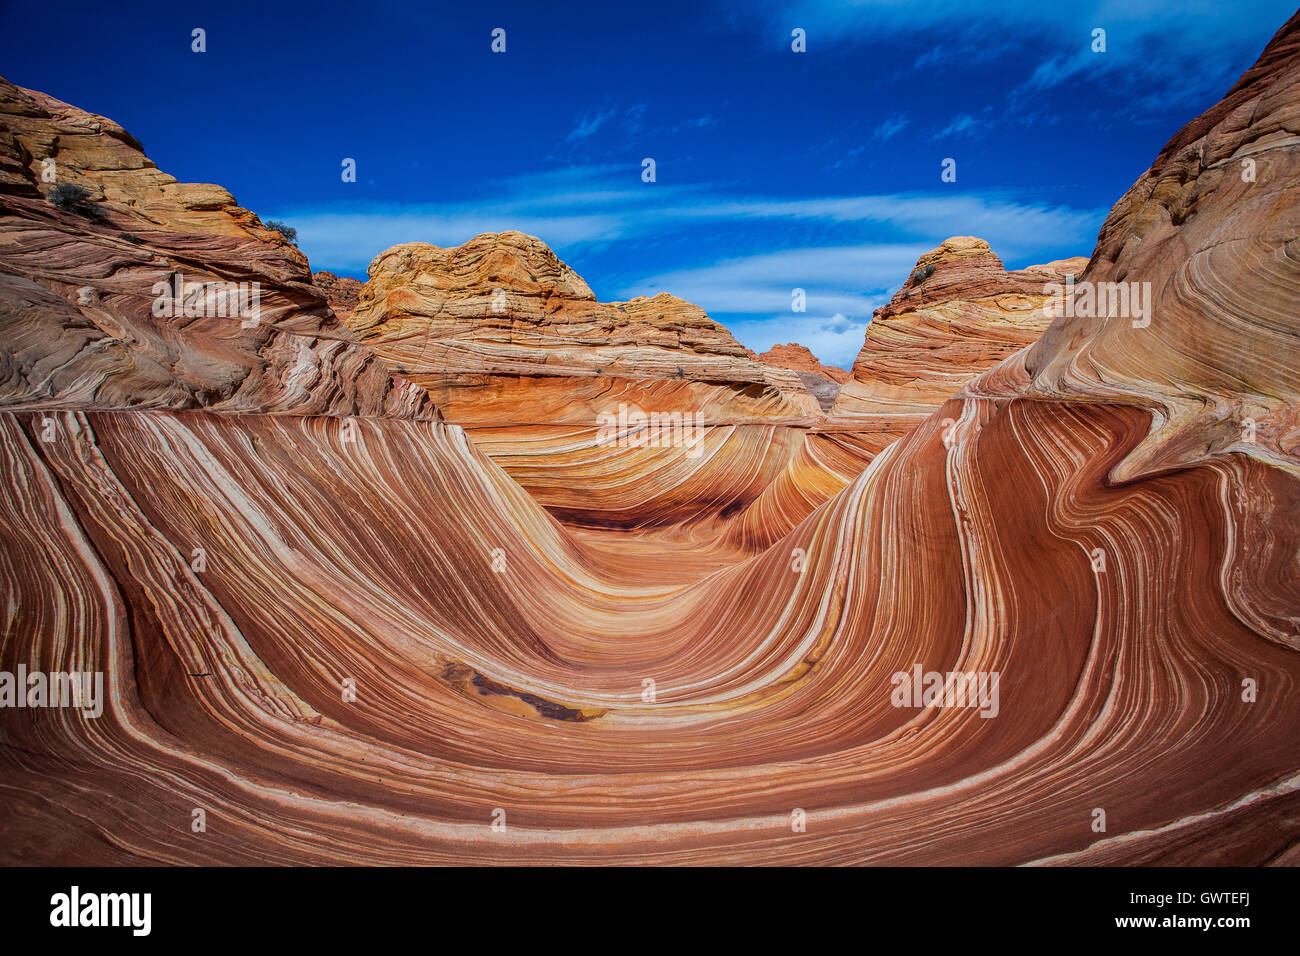 Rock formation of The Wave in North Coyote Butte, Arizona Stock Photo